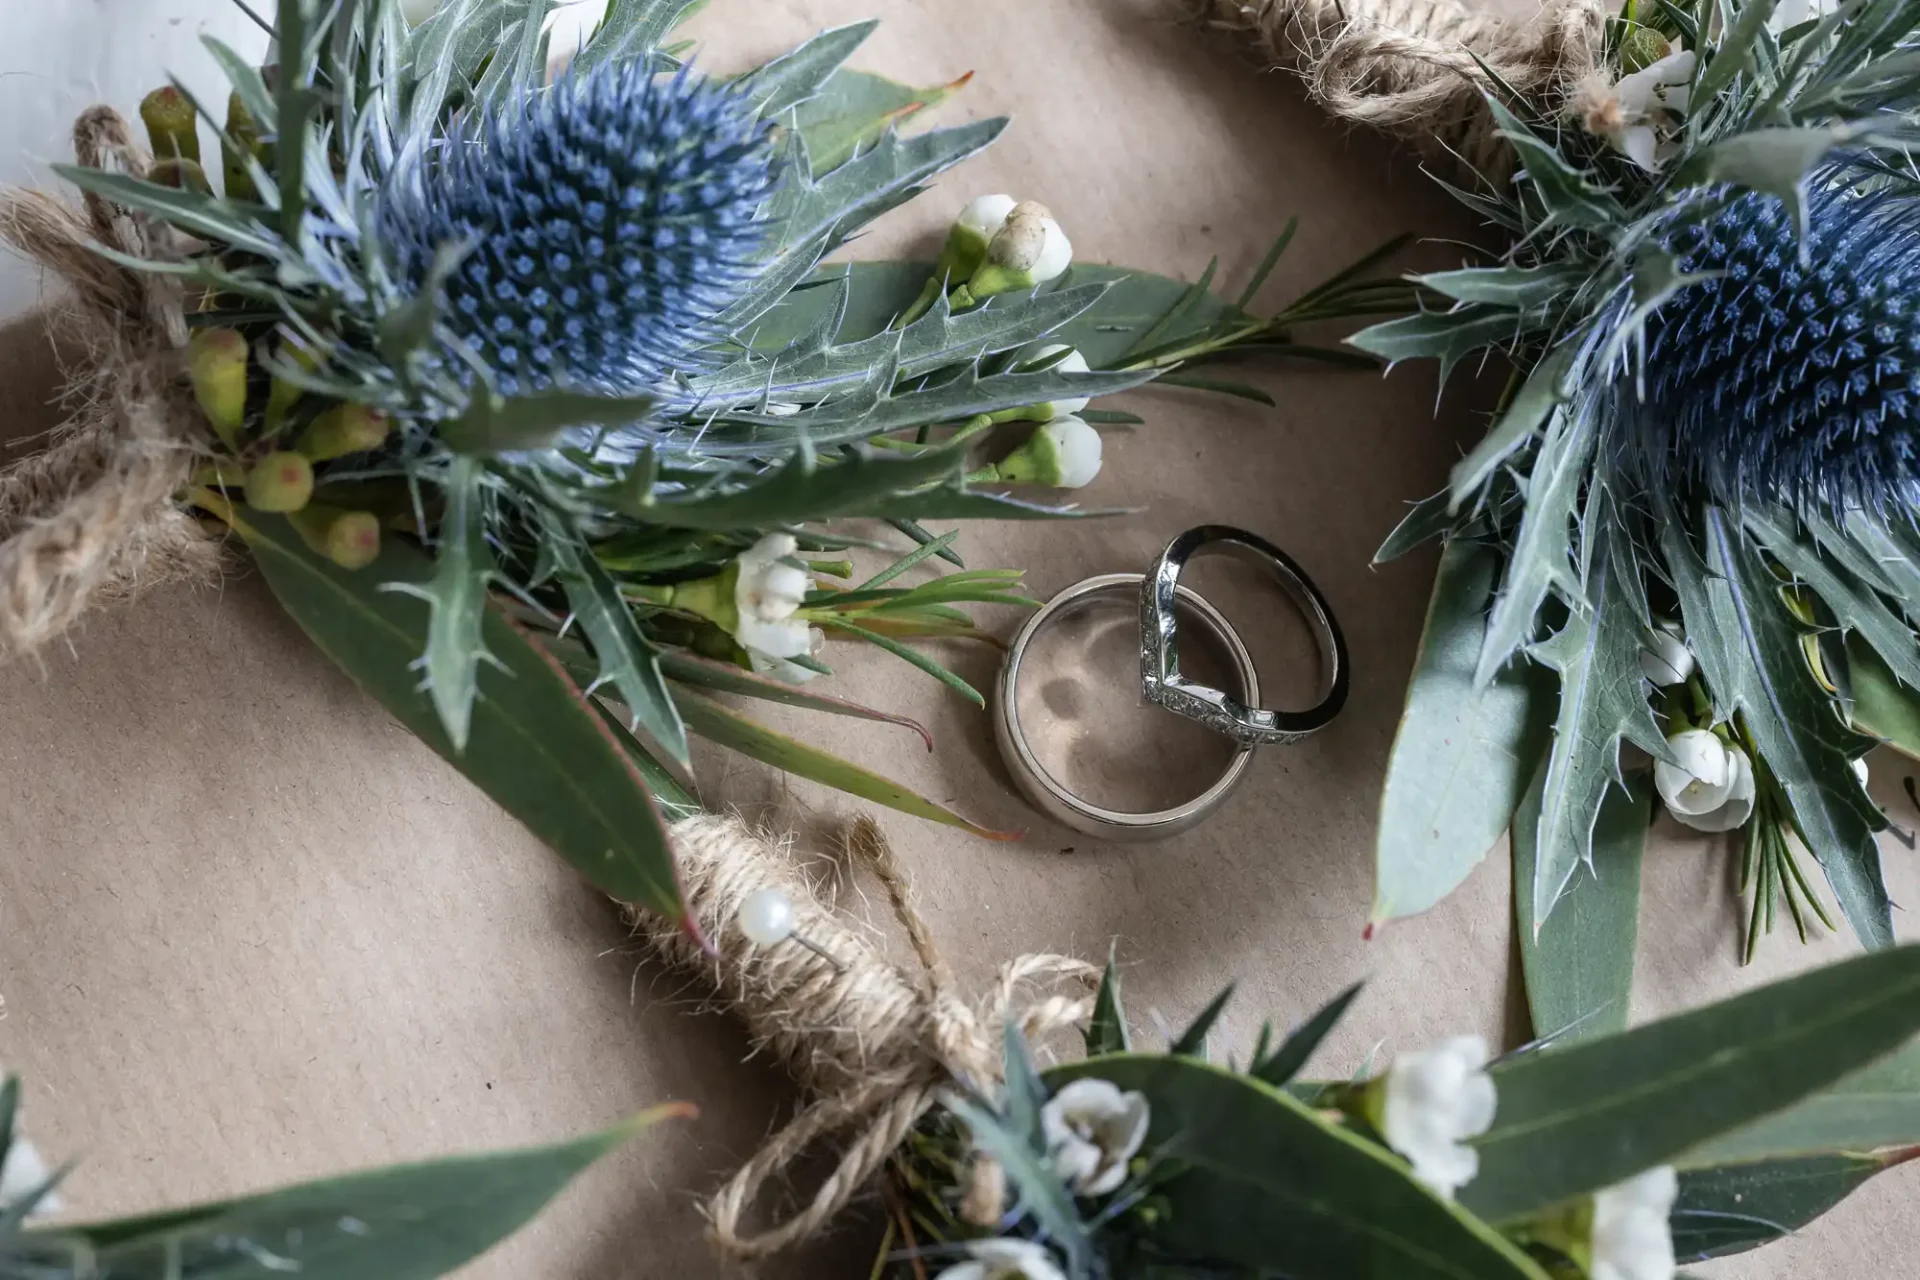 Two silver wedding rings are surrounded by a wreath of green foliage, blue thistle, and white flowers on a brown paper background.